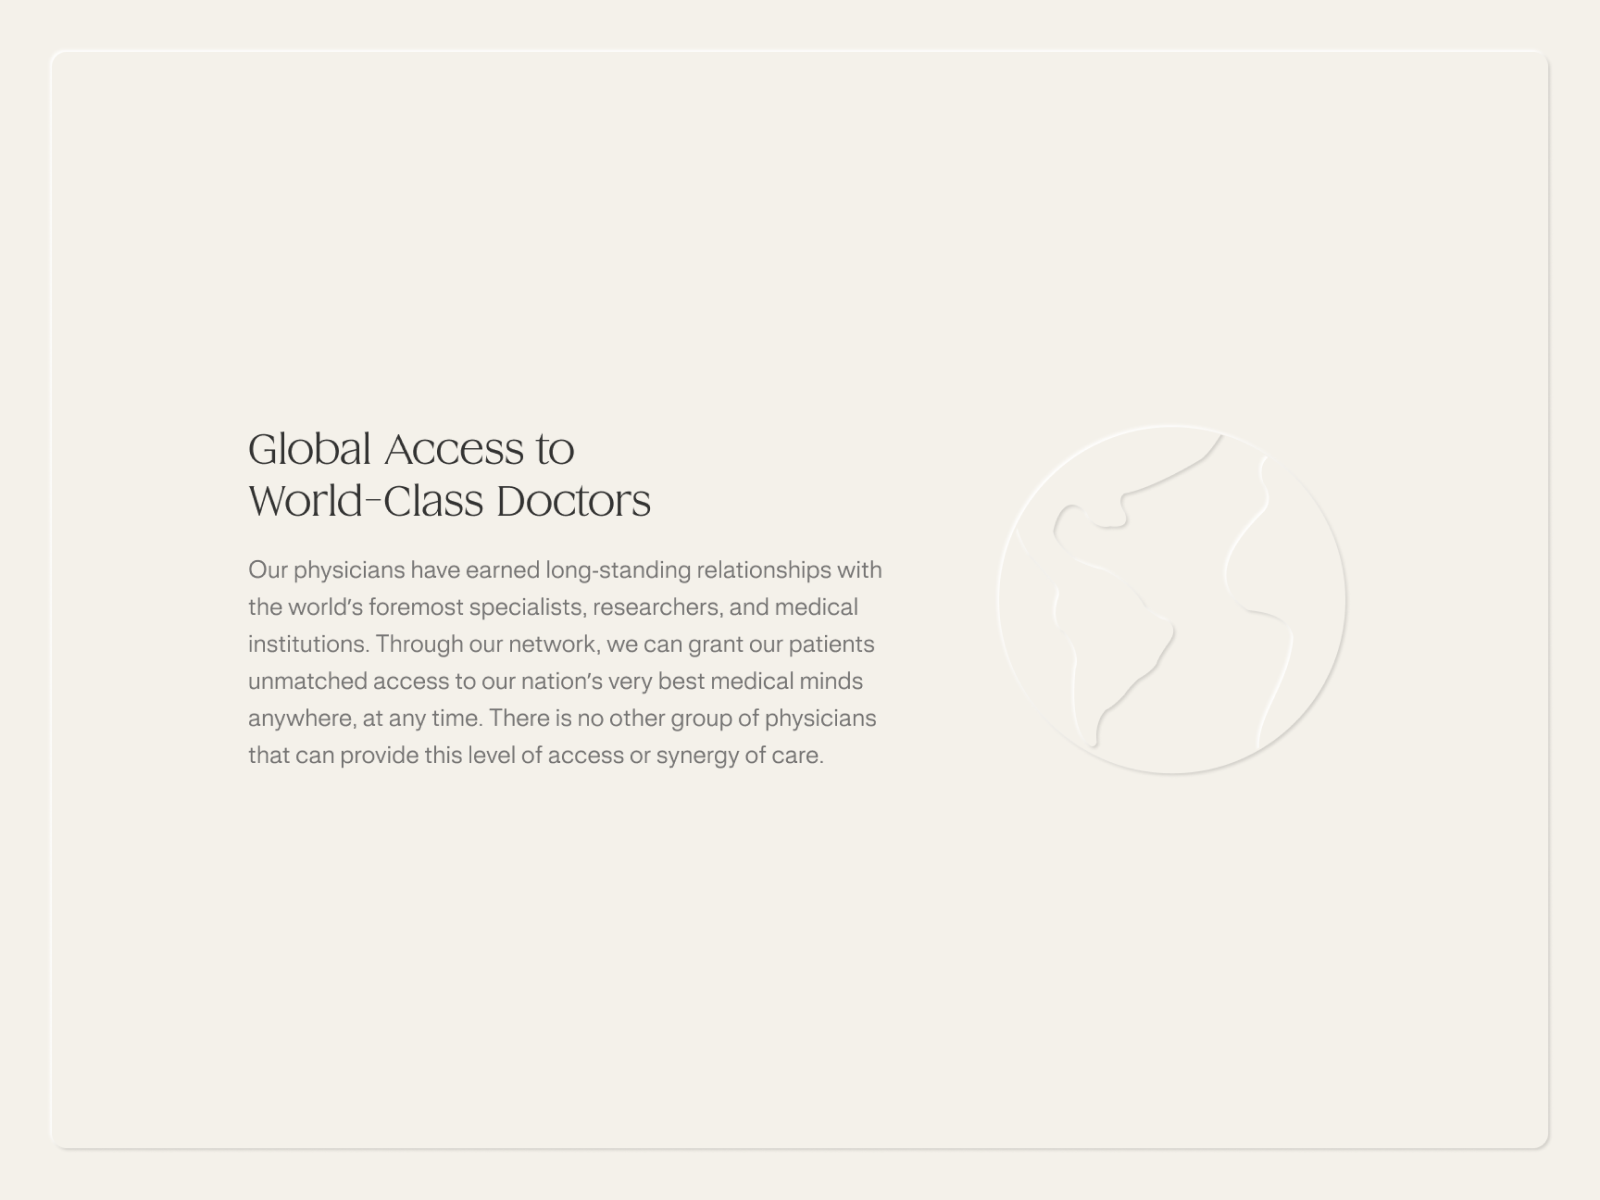 Global Access to World-Class Doctors